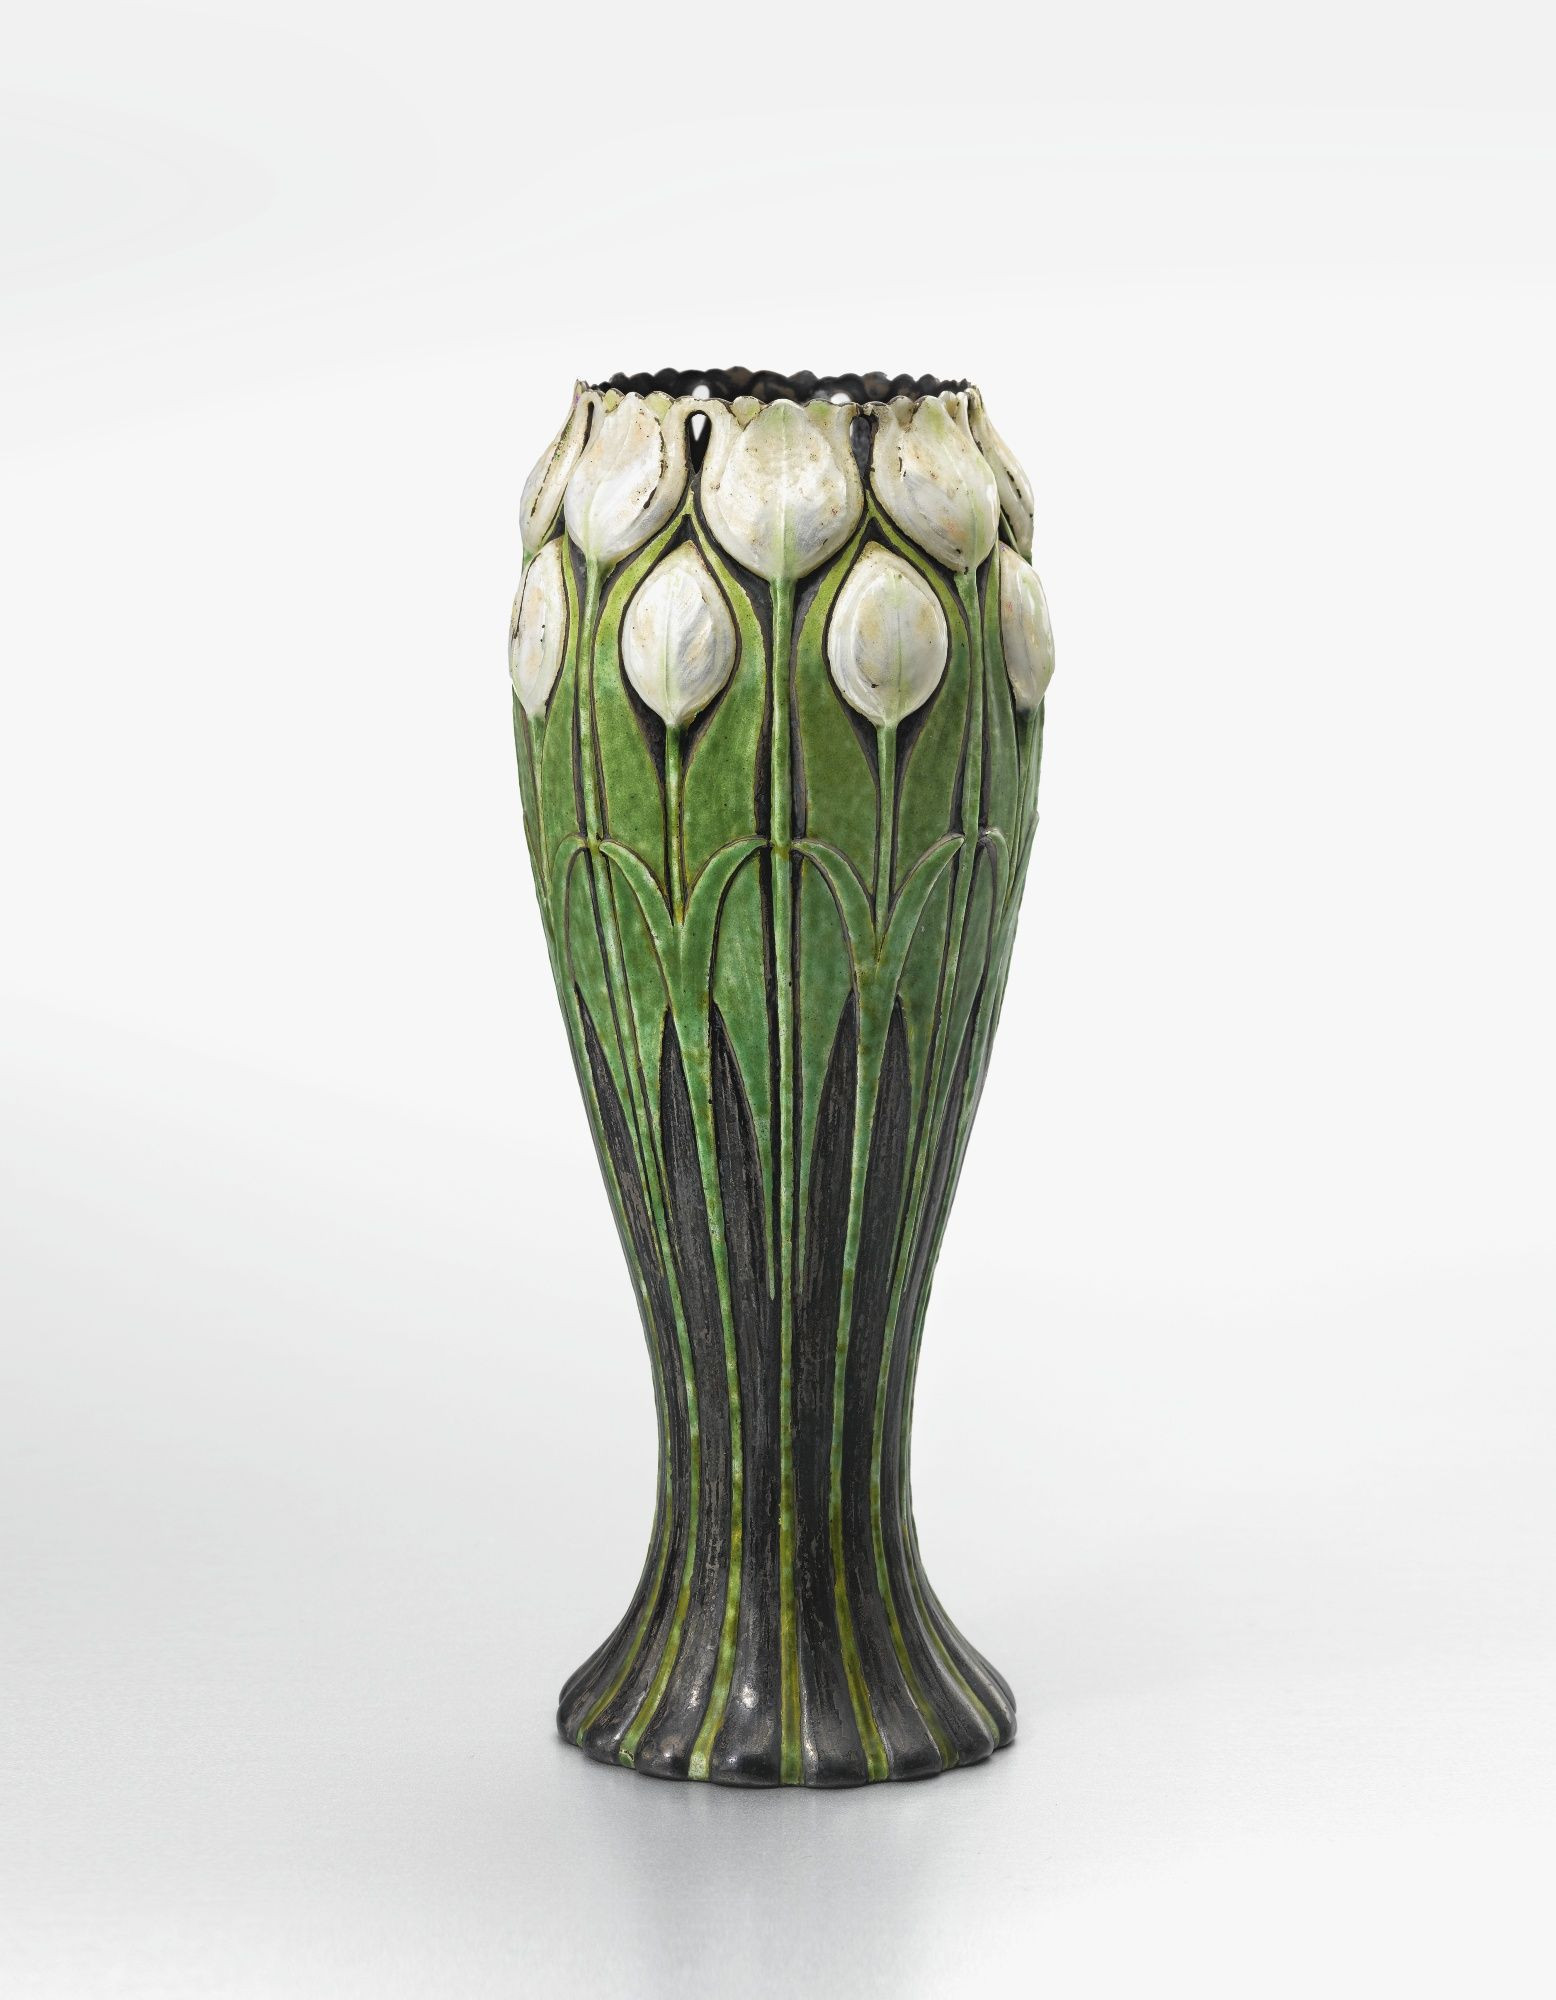 14 attractive Tiffany Tulip Vase Price 2024 free download tiffany tulip vase price of crystal vase prices images tiffany co tulip vase impressed for crystal vase prices images tiffany co tulip vase impressed tiffany co makers 4105